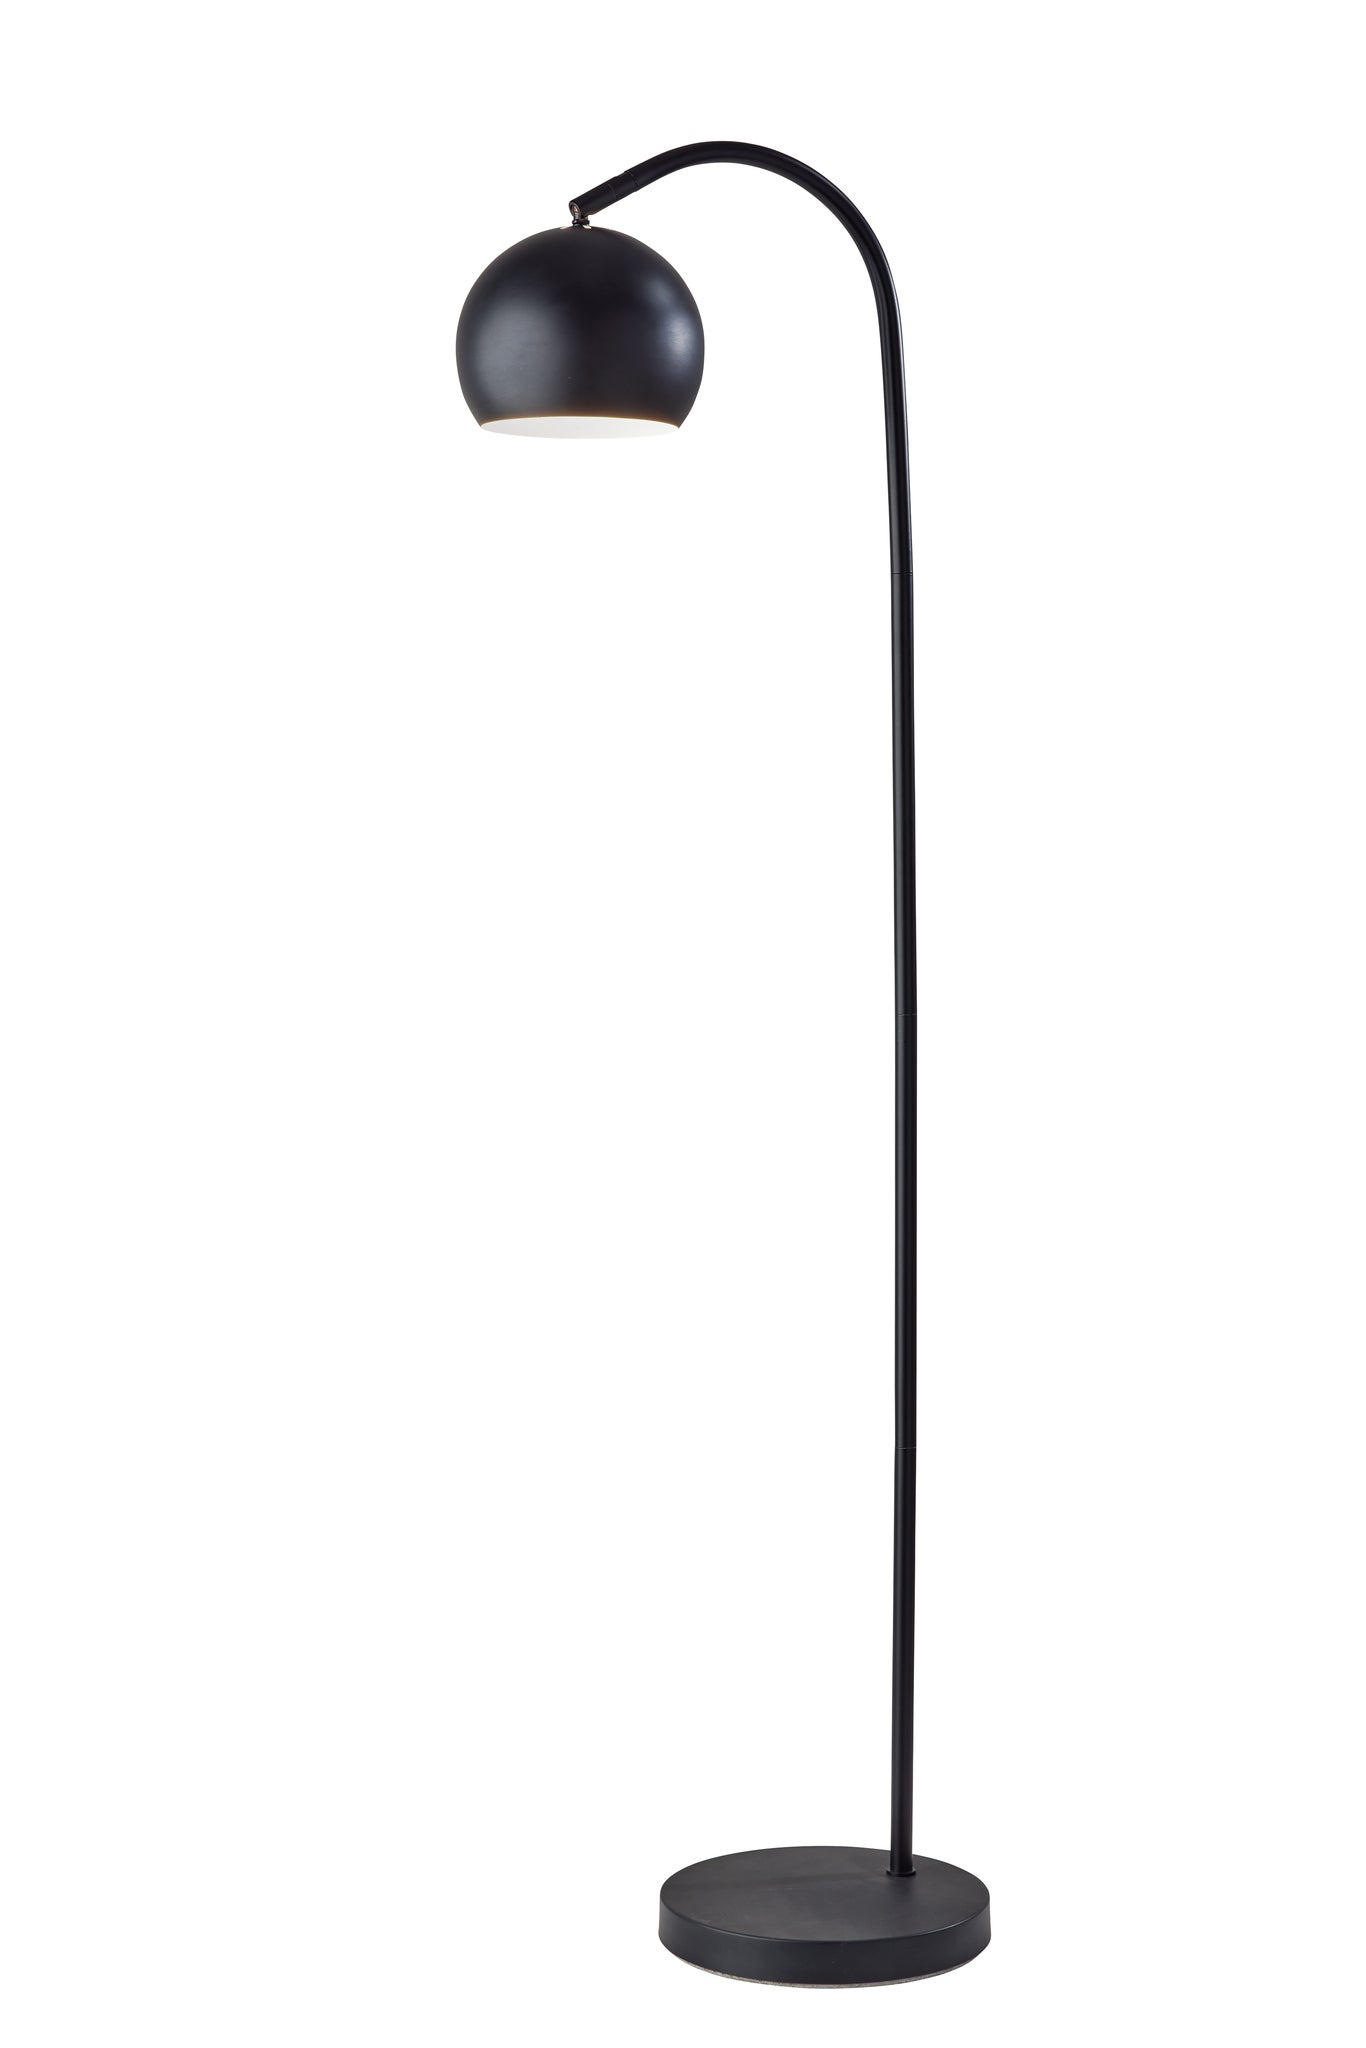 Adesso Emerson 59 in. Antique Brass Floor Lamp 5138-21 - The Home